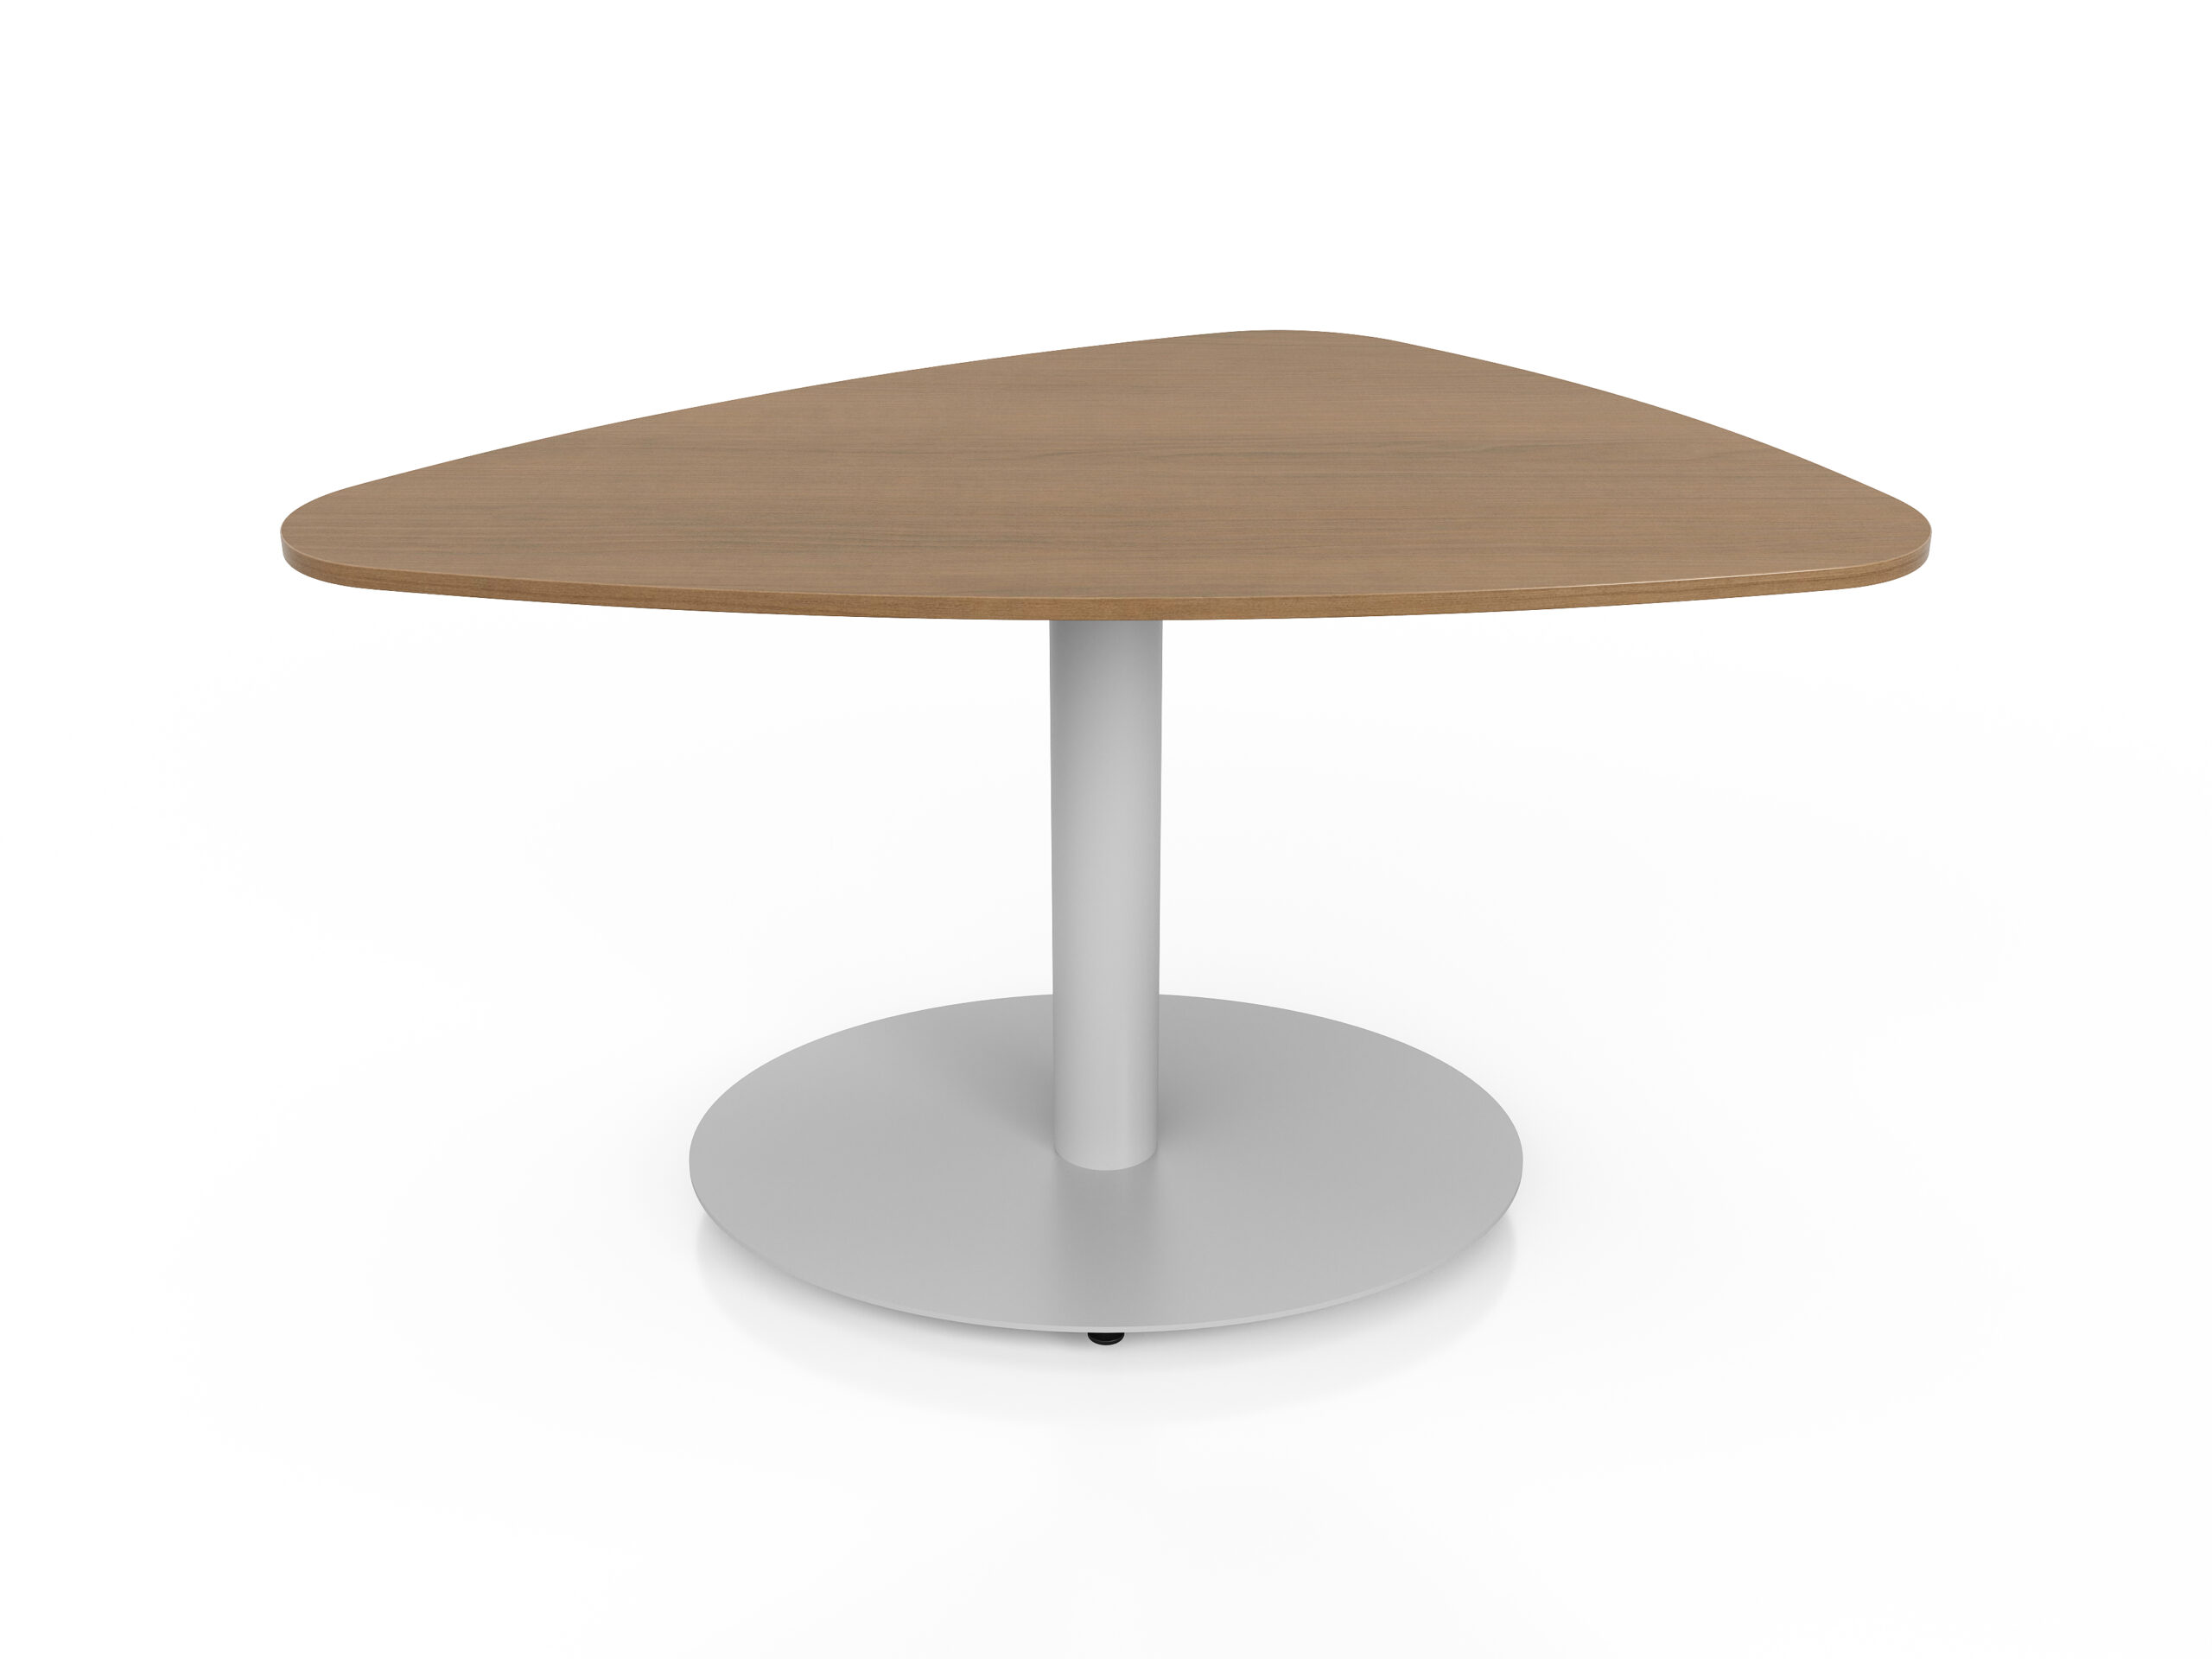 Flowform® Learn Lounge Offset Triangle Table